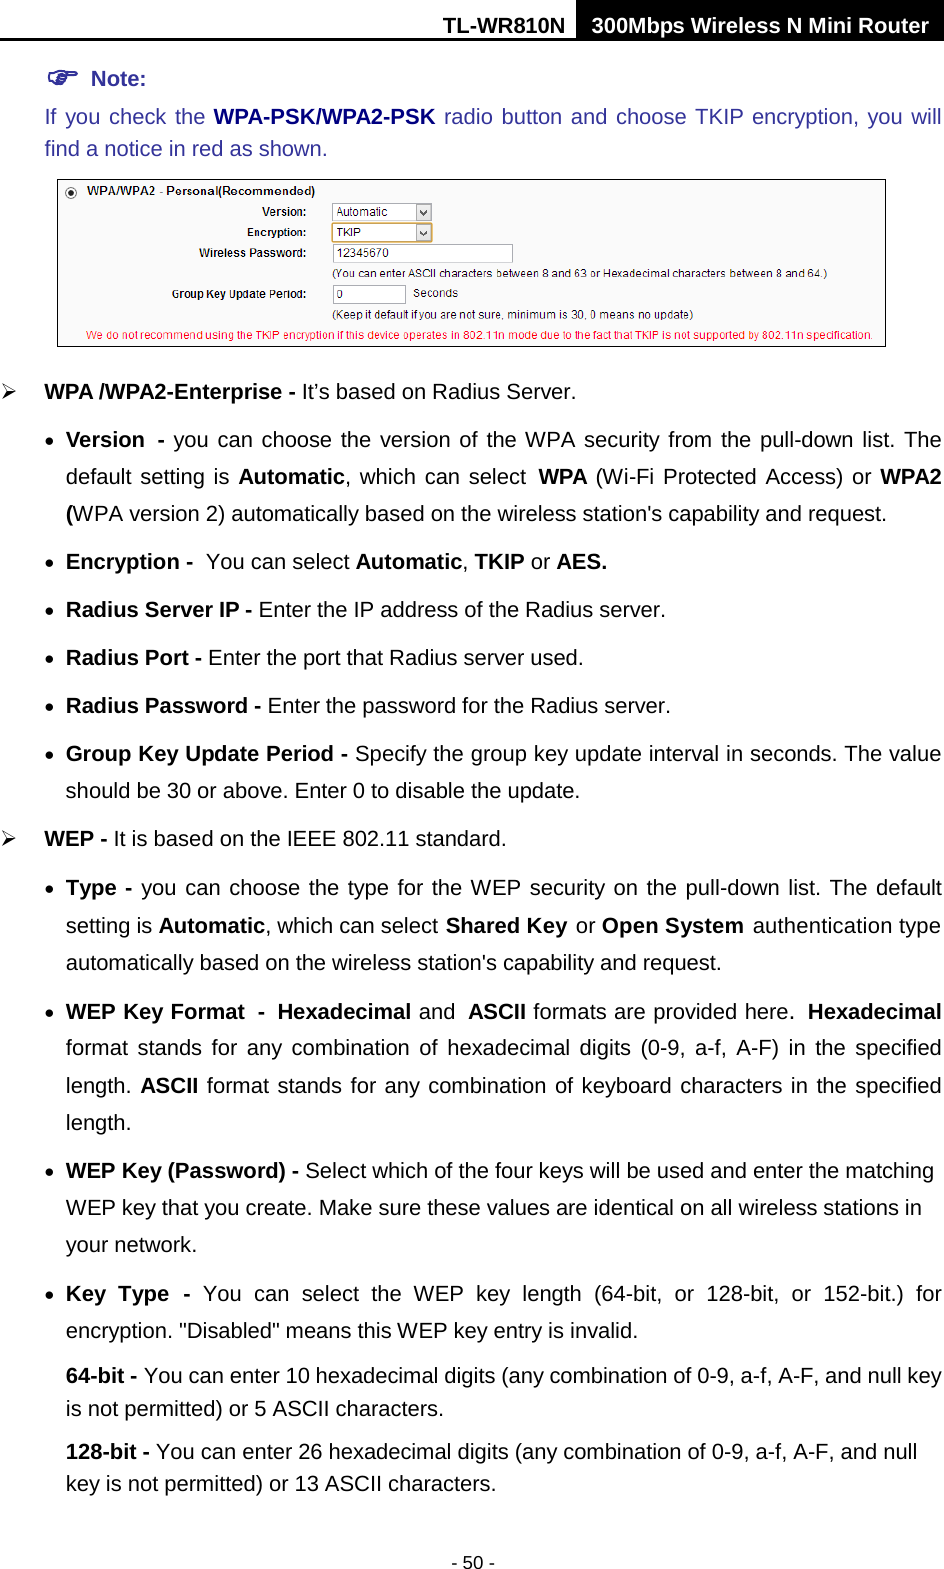 TL-WR810N 300Mbps Wireless N Mini Router  - 50 -  Note:   If you check the WPA-PSK/WPA2-PSK radio button and choose TKIP encryption, you will find a notice in red as shown.   WPA /WPA2-Enterprise - It’s based on Radius Server. • Version - you can choose the version of the WPA security from the pull-down list. The default setting is Automatic, which can select WPA (Wi-Fi Protected Access) or WPA2 (WPA version 2) automatically based on the wireless station&apos;s capability and request. • Encryption - You can select Automatic, TKIP or AES. • Radius Server IP - Enter the IP address of the Radius server. • Radius Port - Enter the port that Radius server used. • Radius Password - Enter the password for the Radius server. • Group Key Update Period - Specify the group key update interval in seconds. The value should be 30 or above. Enter 0 to disable the update.  WEP - It is based on the IEEE 802.11 standard.   • Type - you can choose the type for the WEP security on the pull-down list. The default setting is Automatic, which can select Shared Key or Open System authentication type automatically based on the wireless station&apos;s capability and request. • WEP Key Format - Hexadecimal and ASCII formats are provided here. Hexadecimal format stands for any combination of hexadecimal digits (0-9, a-f, A-F) in the specified length. ASCII format stands for any combination of keyboard characters in the specified length.   • WEP Key (Password) - Select which of the four keys will be used and enter the matching WEP key that you create. Make sure these values are identical on all wireless stations in your network.   • Key Type - You can select the WEP key length (64-bit, or 128-bit, or 152-bit.) for encryption. &quot;Disabled&quot; means this WEP key entry is invalid. 64-bit - You can enter 10 hexadecimal digits (any combination of 0-9, a-f, A-F, and null key is not permitted) or 5 ASCII characters.   128-bit - You can enter 26 hexadecimal digits (any combination of 0-9, a-f, A-F, and null key is not permitted) or 13 ASCII characters.   